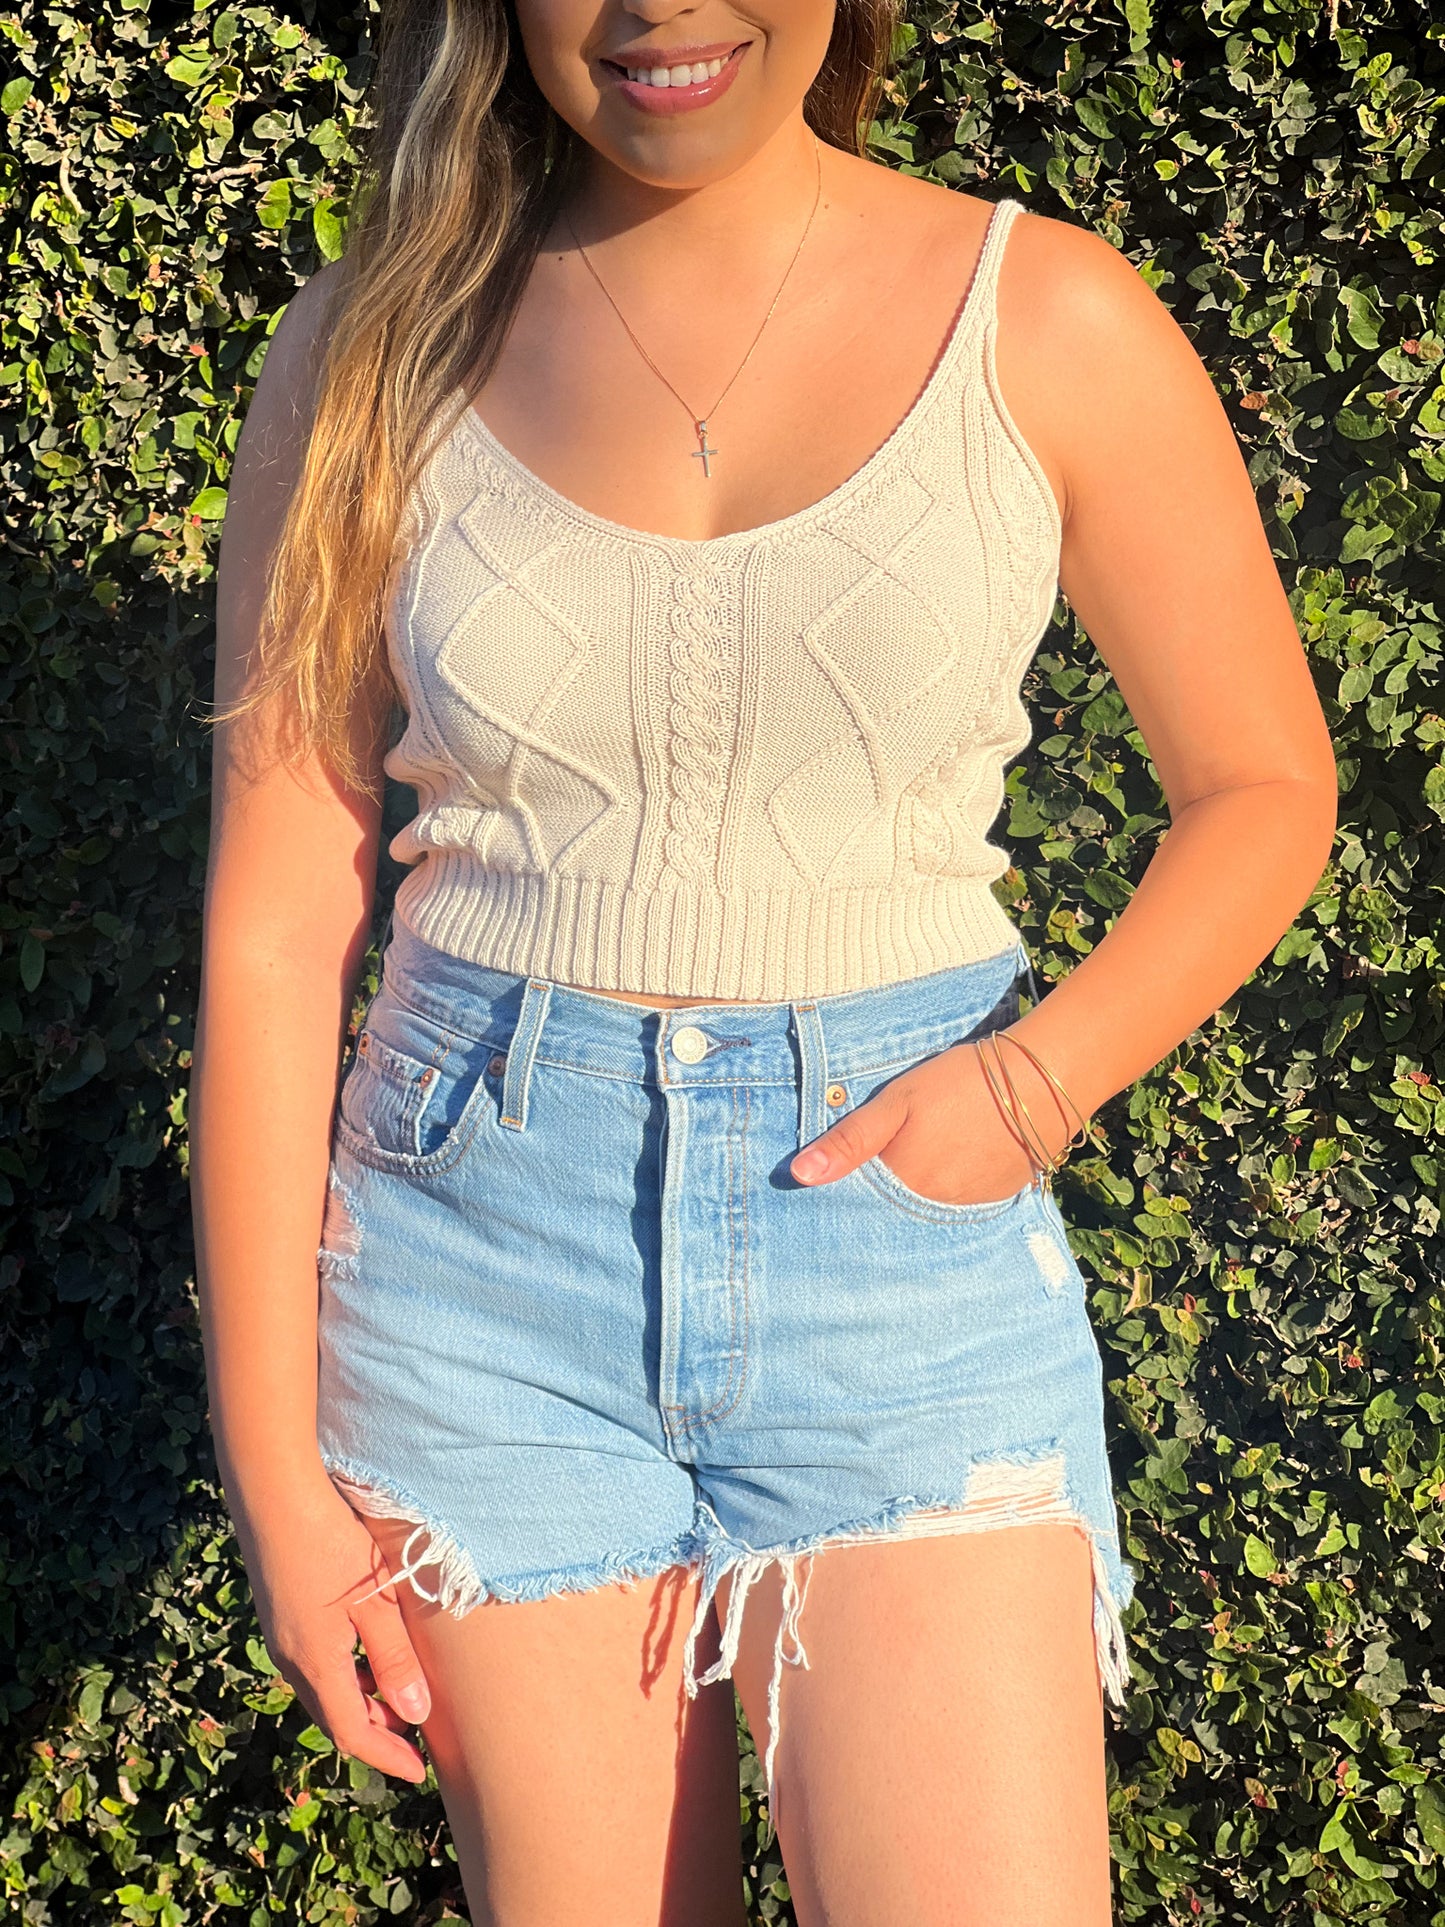 Sunrise Crochet Top is a Crochet Top. V-Neck. 100% Polyester. Perfect for the summer. Throw in on with a cute pair of shorts and you have a cute look!